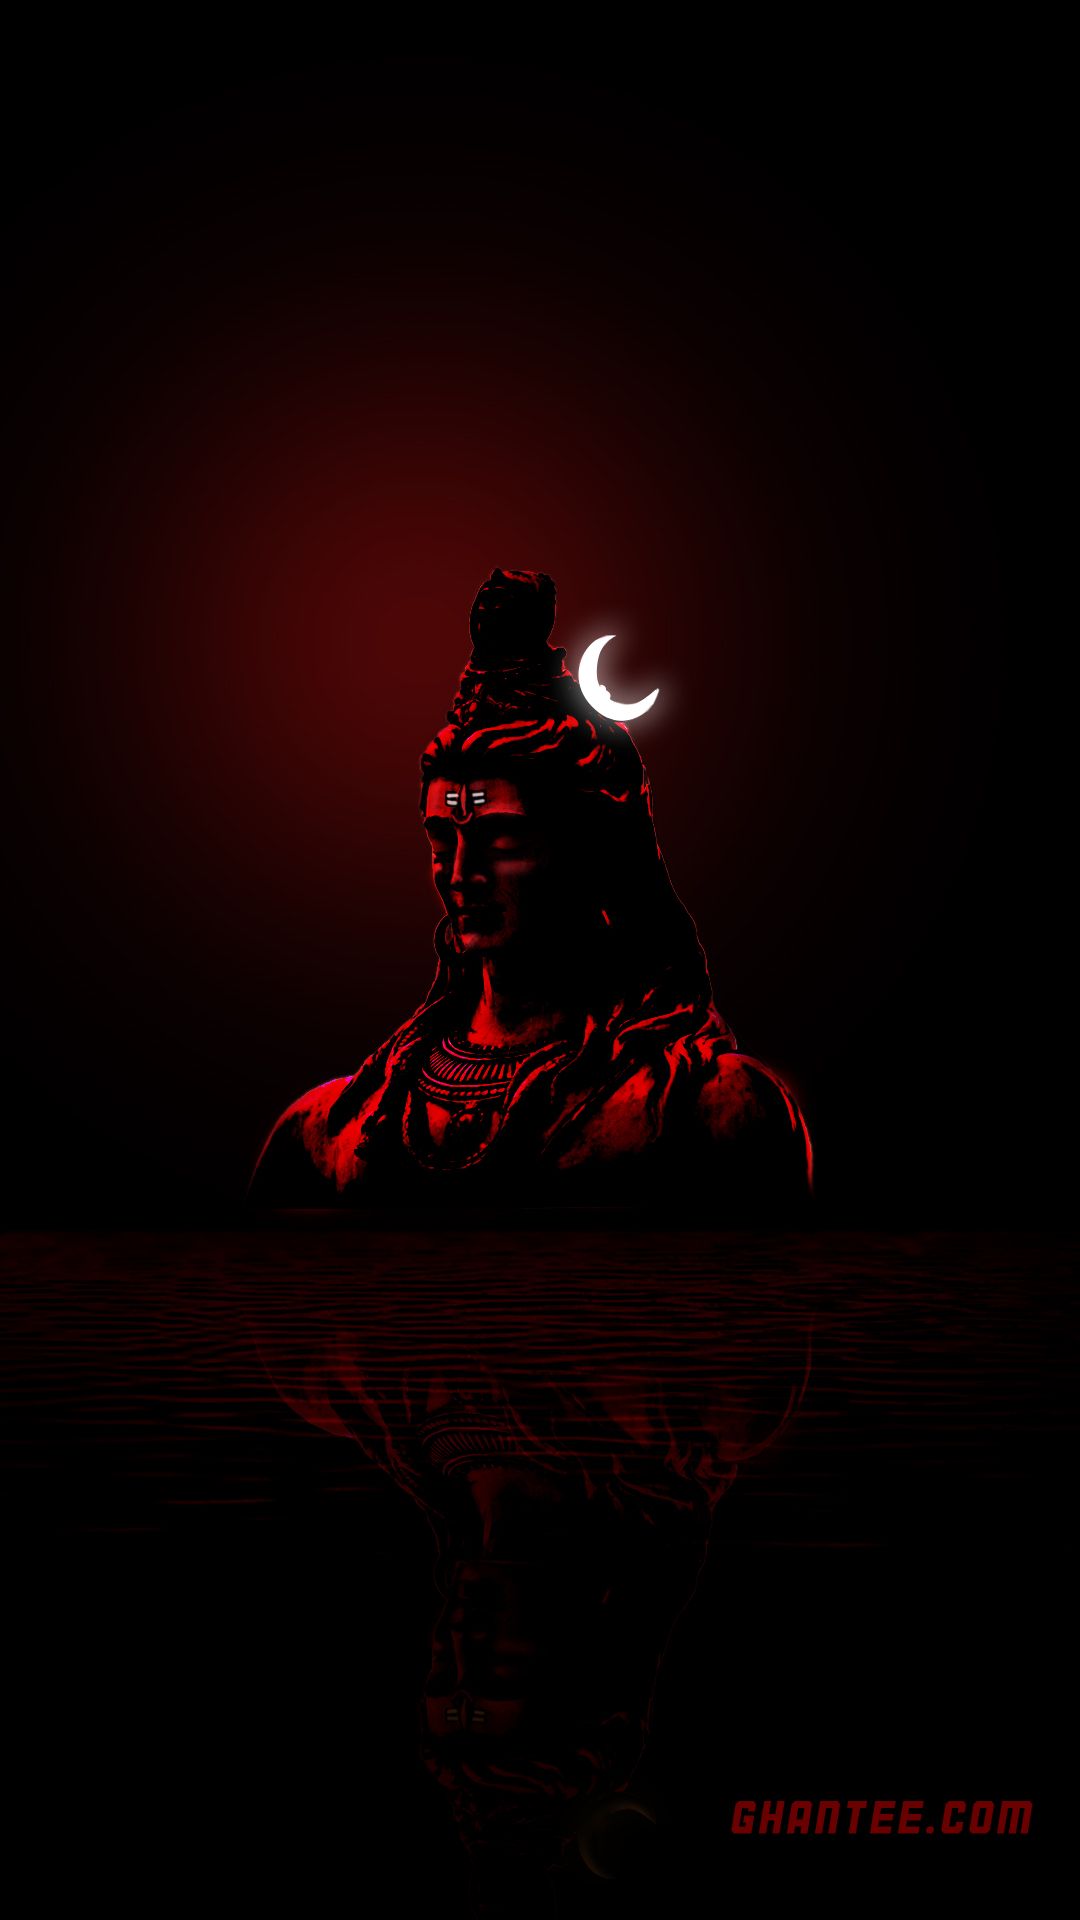 Best lord shiva wallpapers for mobile devices ghantee shiva wallpaper lord shiva hd wallpaper lord shiva hd images